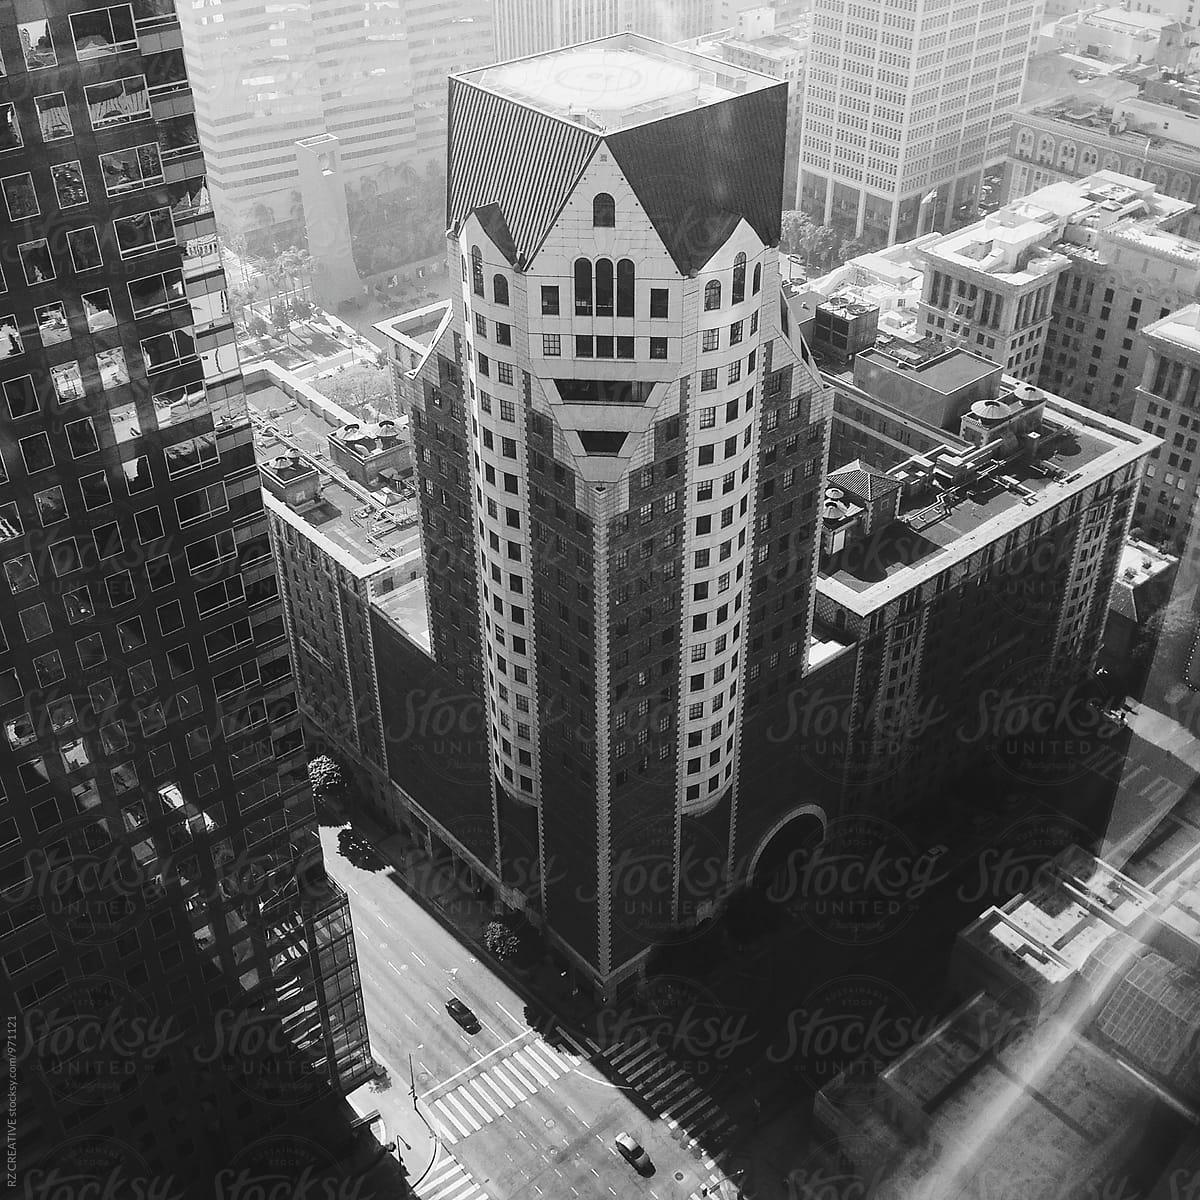 Black and white birds eye view of high rises in downtown Los Angeles.